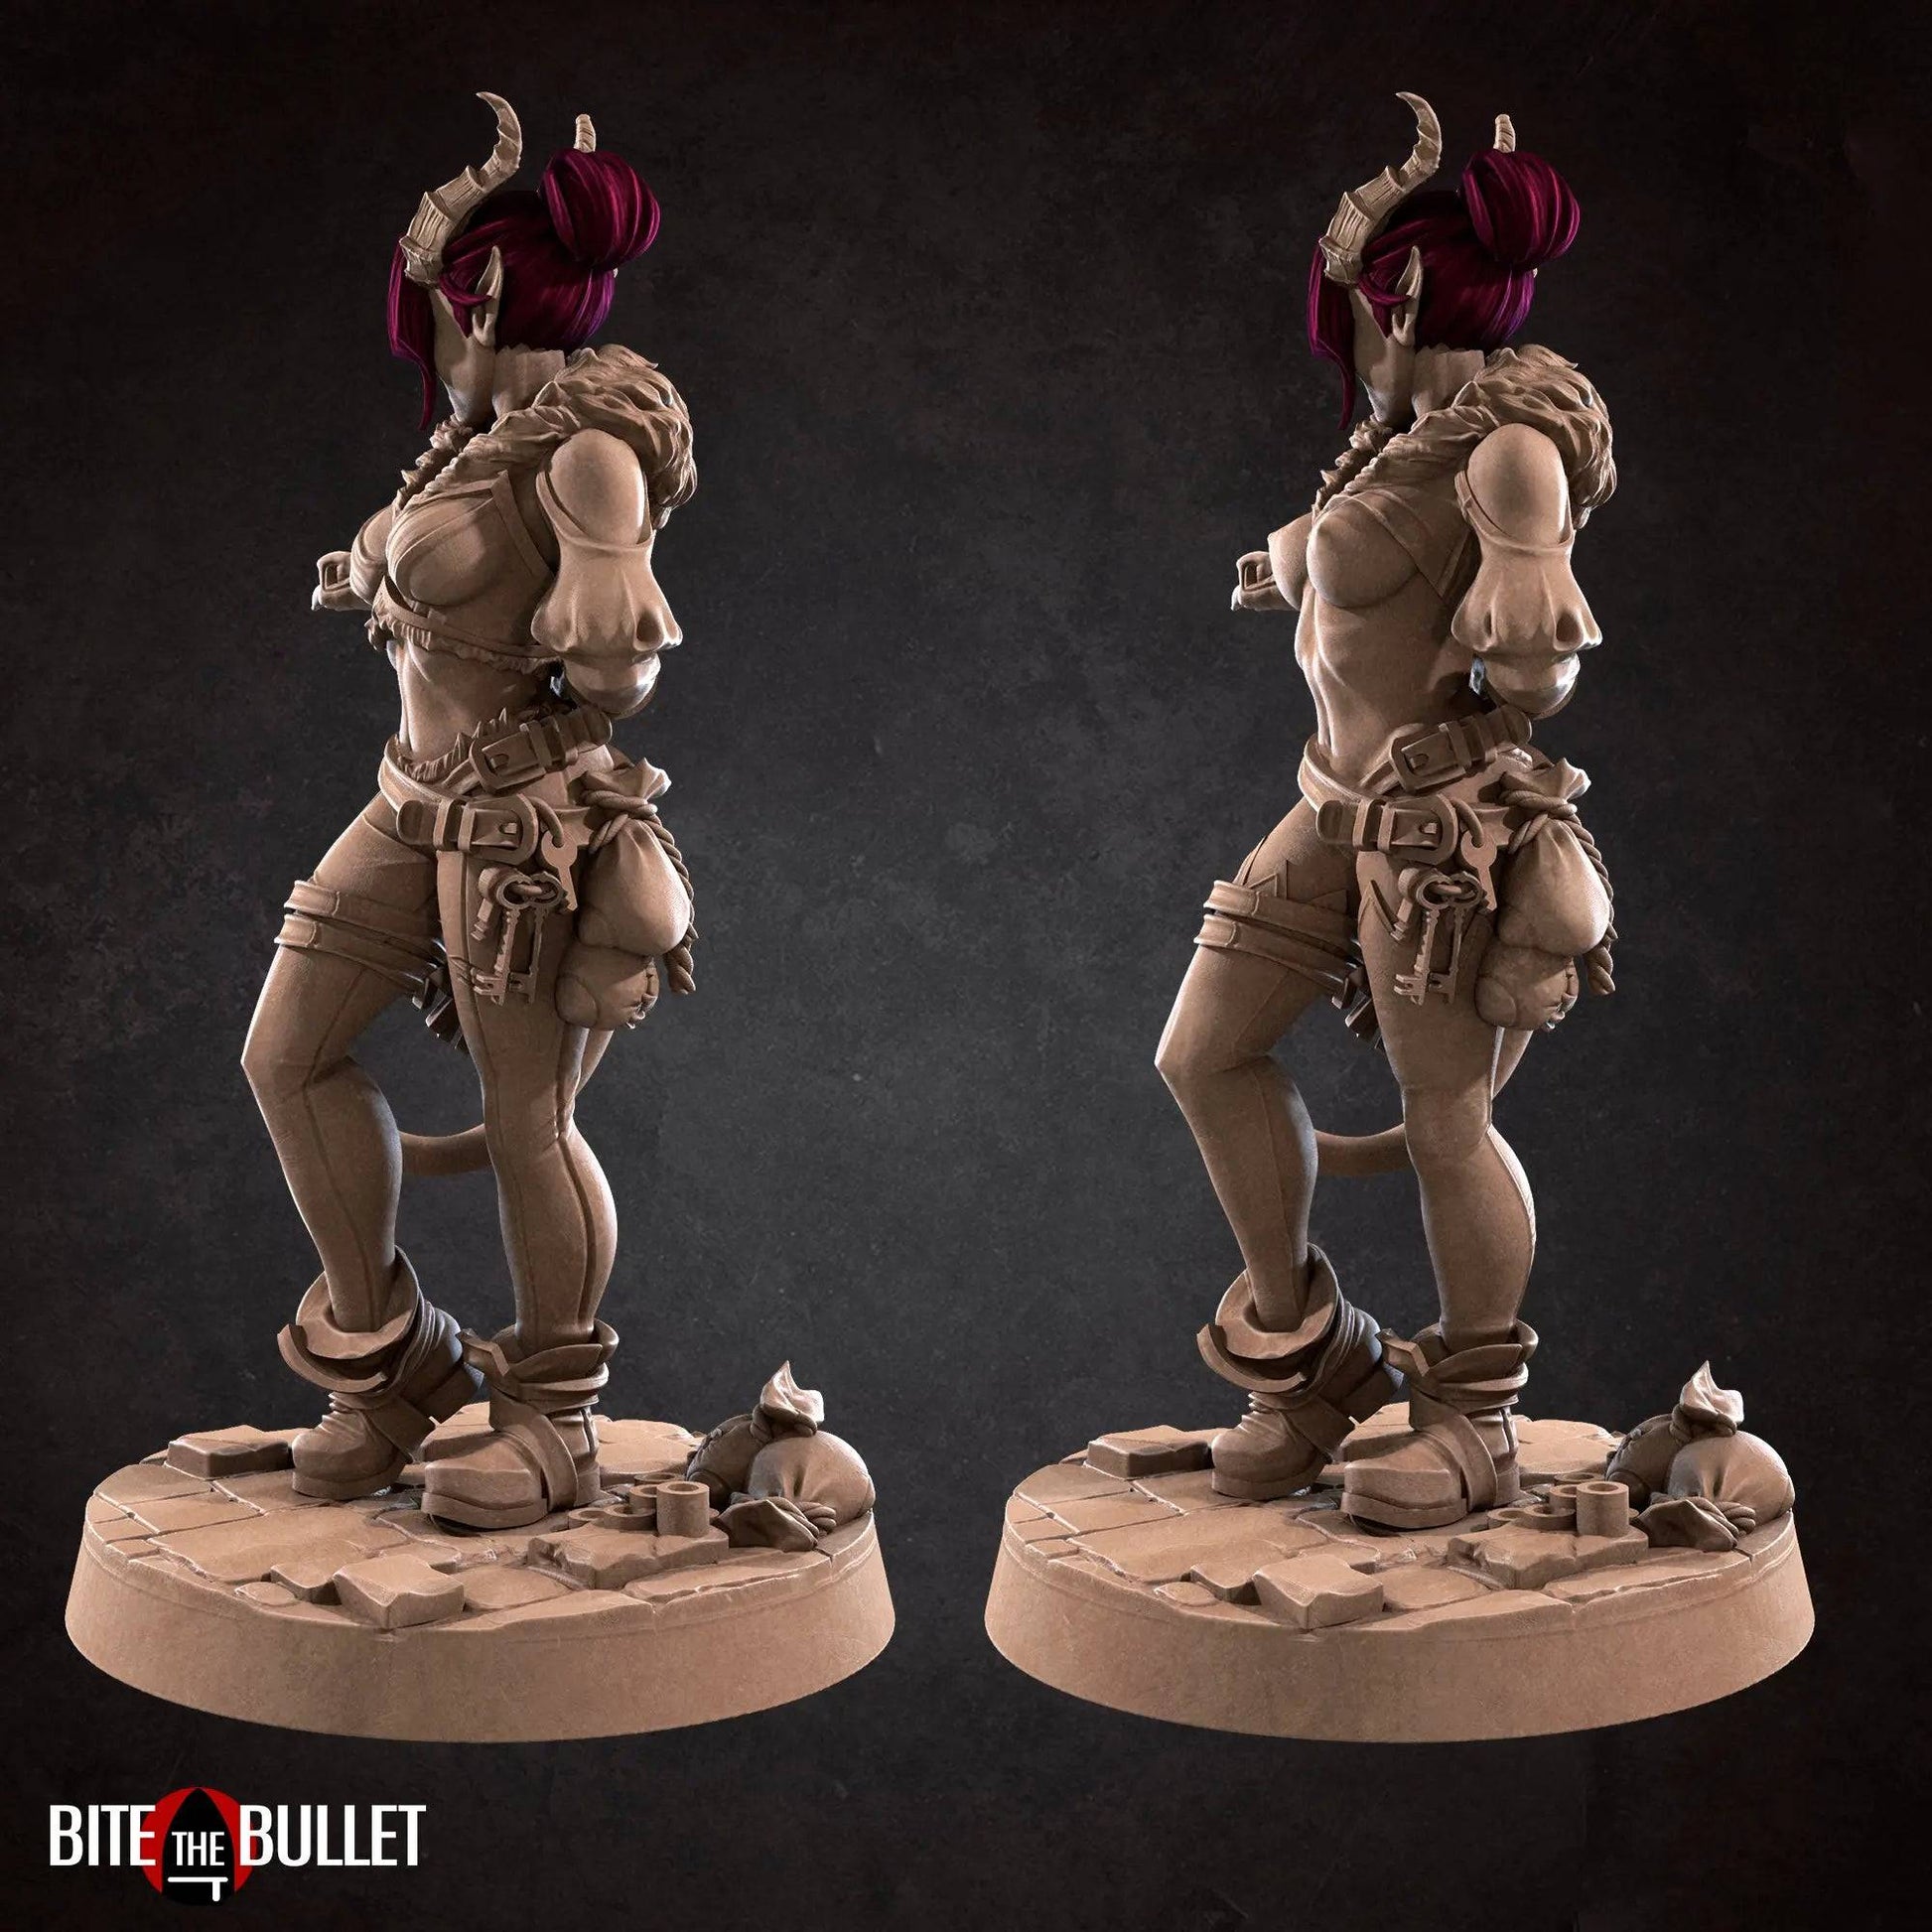 Fiona, Pinup SFW NSFW Lovely Woman, Tiefling Hiding Knife | D&D Miniature Pinup | Bite the Bullet - Tattles Told 3D